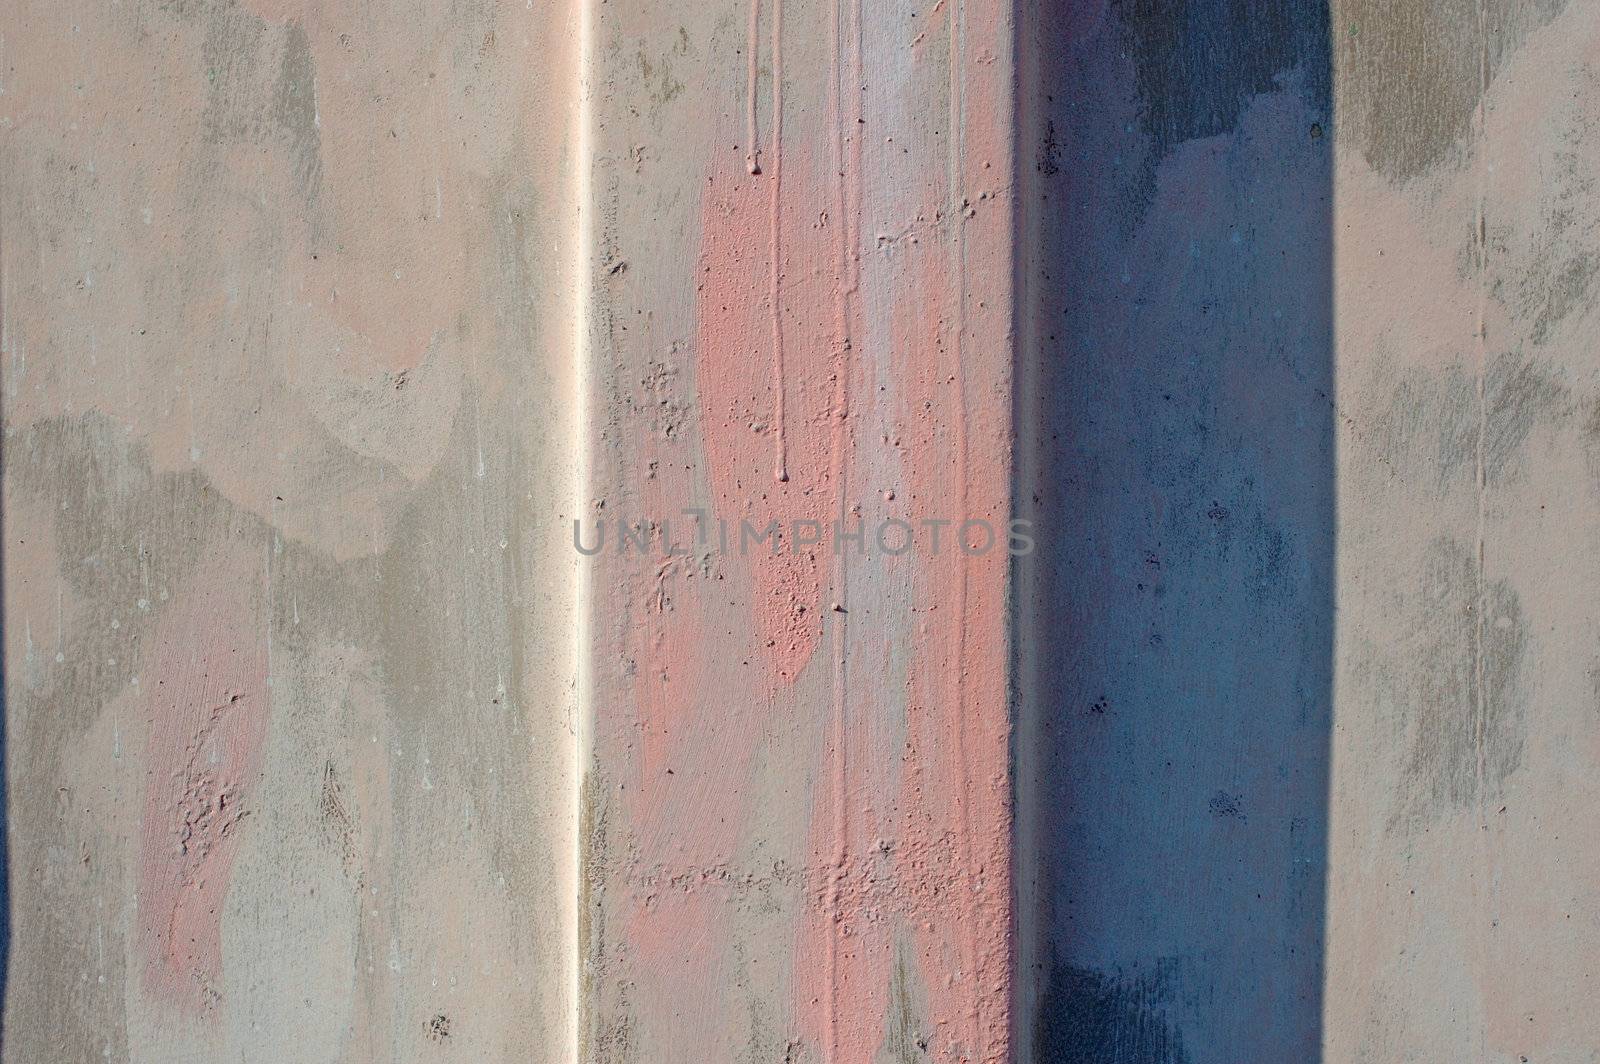 Old painted metal container wall - brutal background (texture).